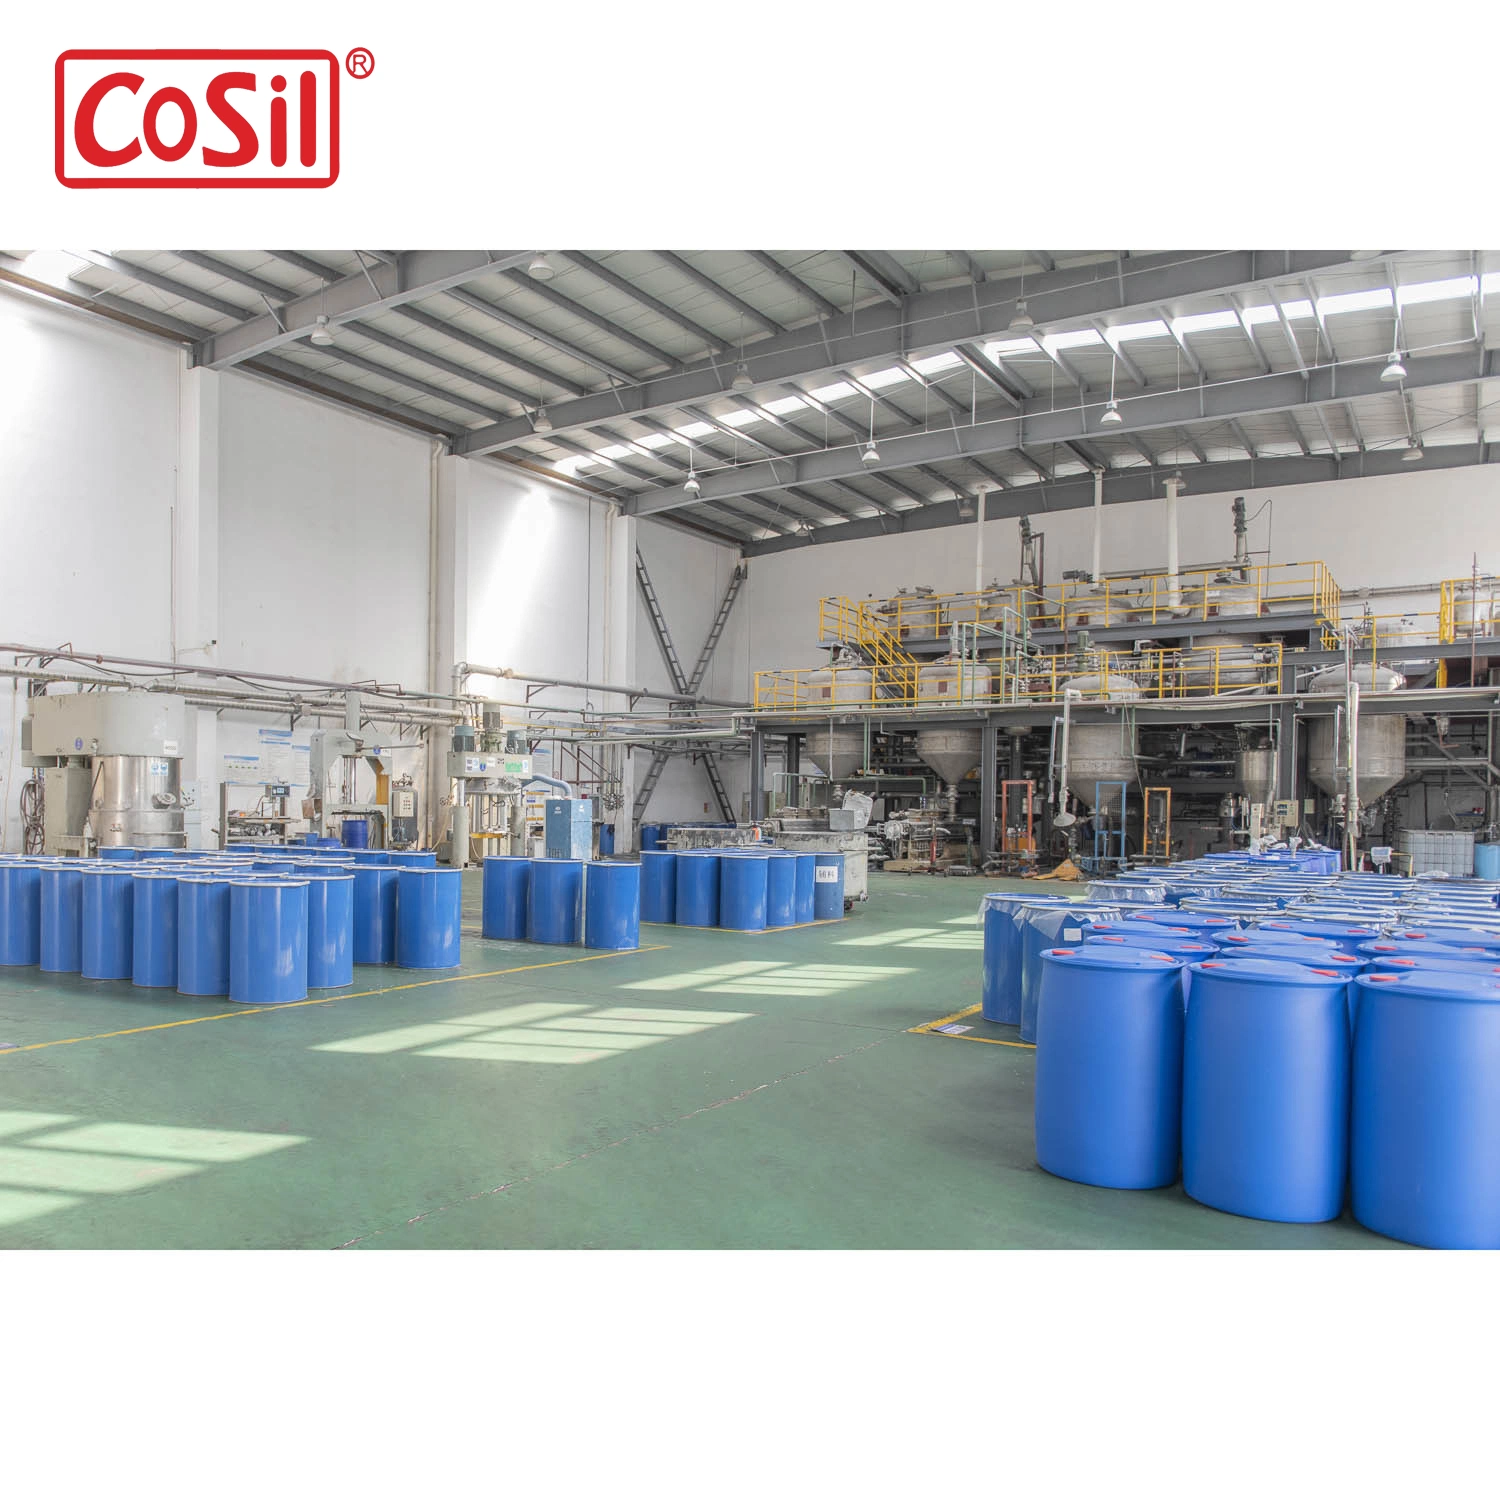 Cosil Hydroxy Silicone Oil, Colorless Oh Polymer, CAS 70131-67-8